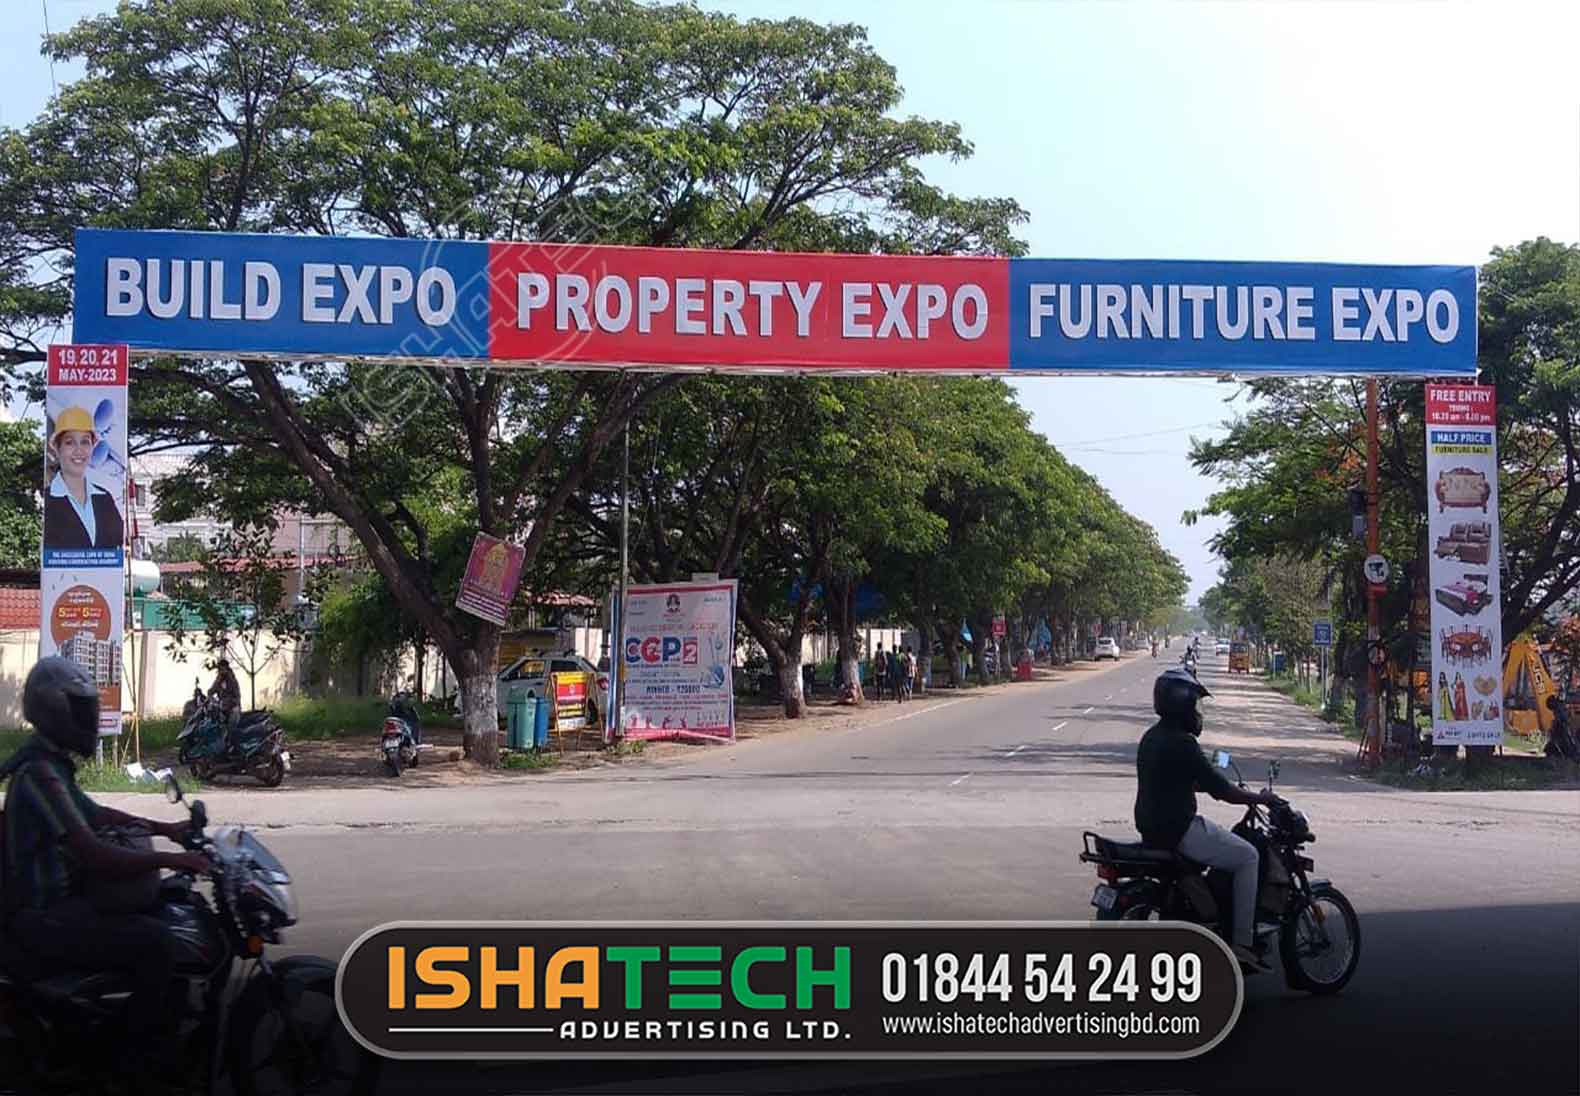 BUILD EXPRO SIGNBOARD, PROPERTY EXPOR BILLBOARD, FURNITURE EXPRO NAME PLATE, ROAD BRANDING SIGNBOARD AND BANNER FESTOON DESIGN AND PRINTING SUPPLIER BD